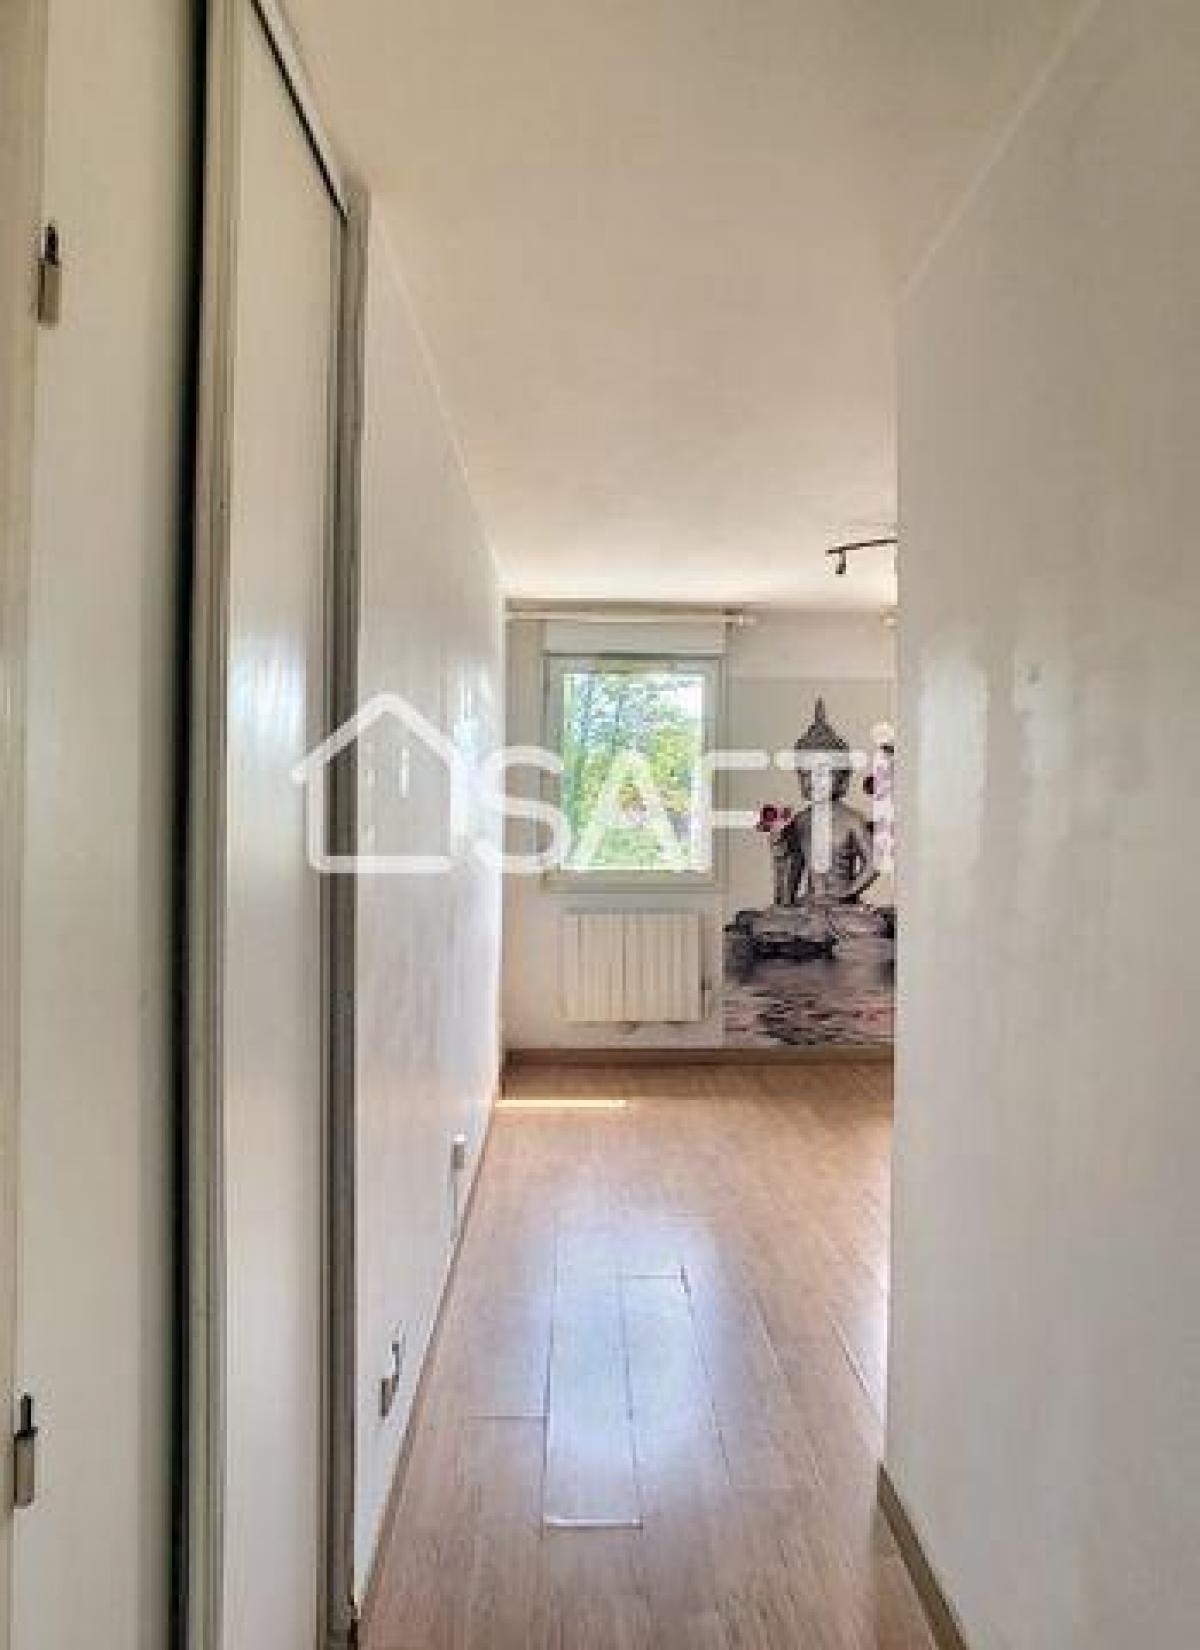 Picture of Apartment For Sale in Lamorlaye, Picardie, France